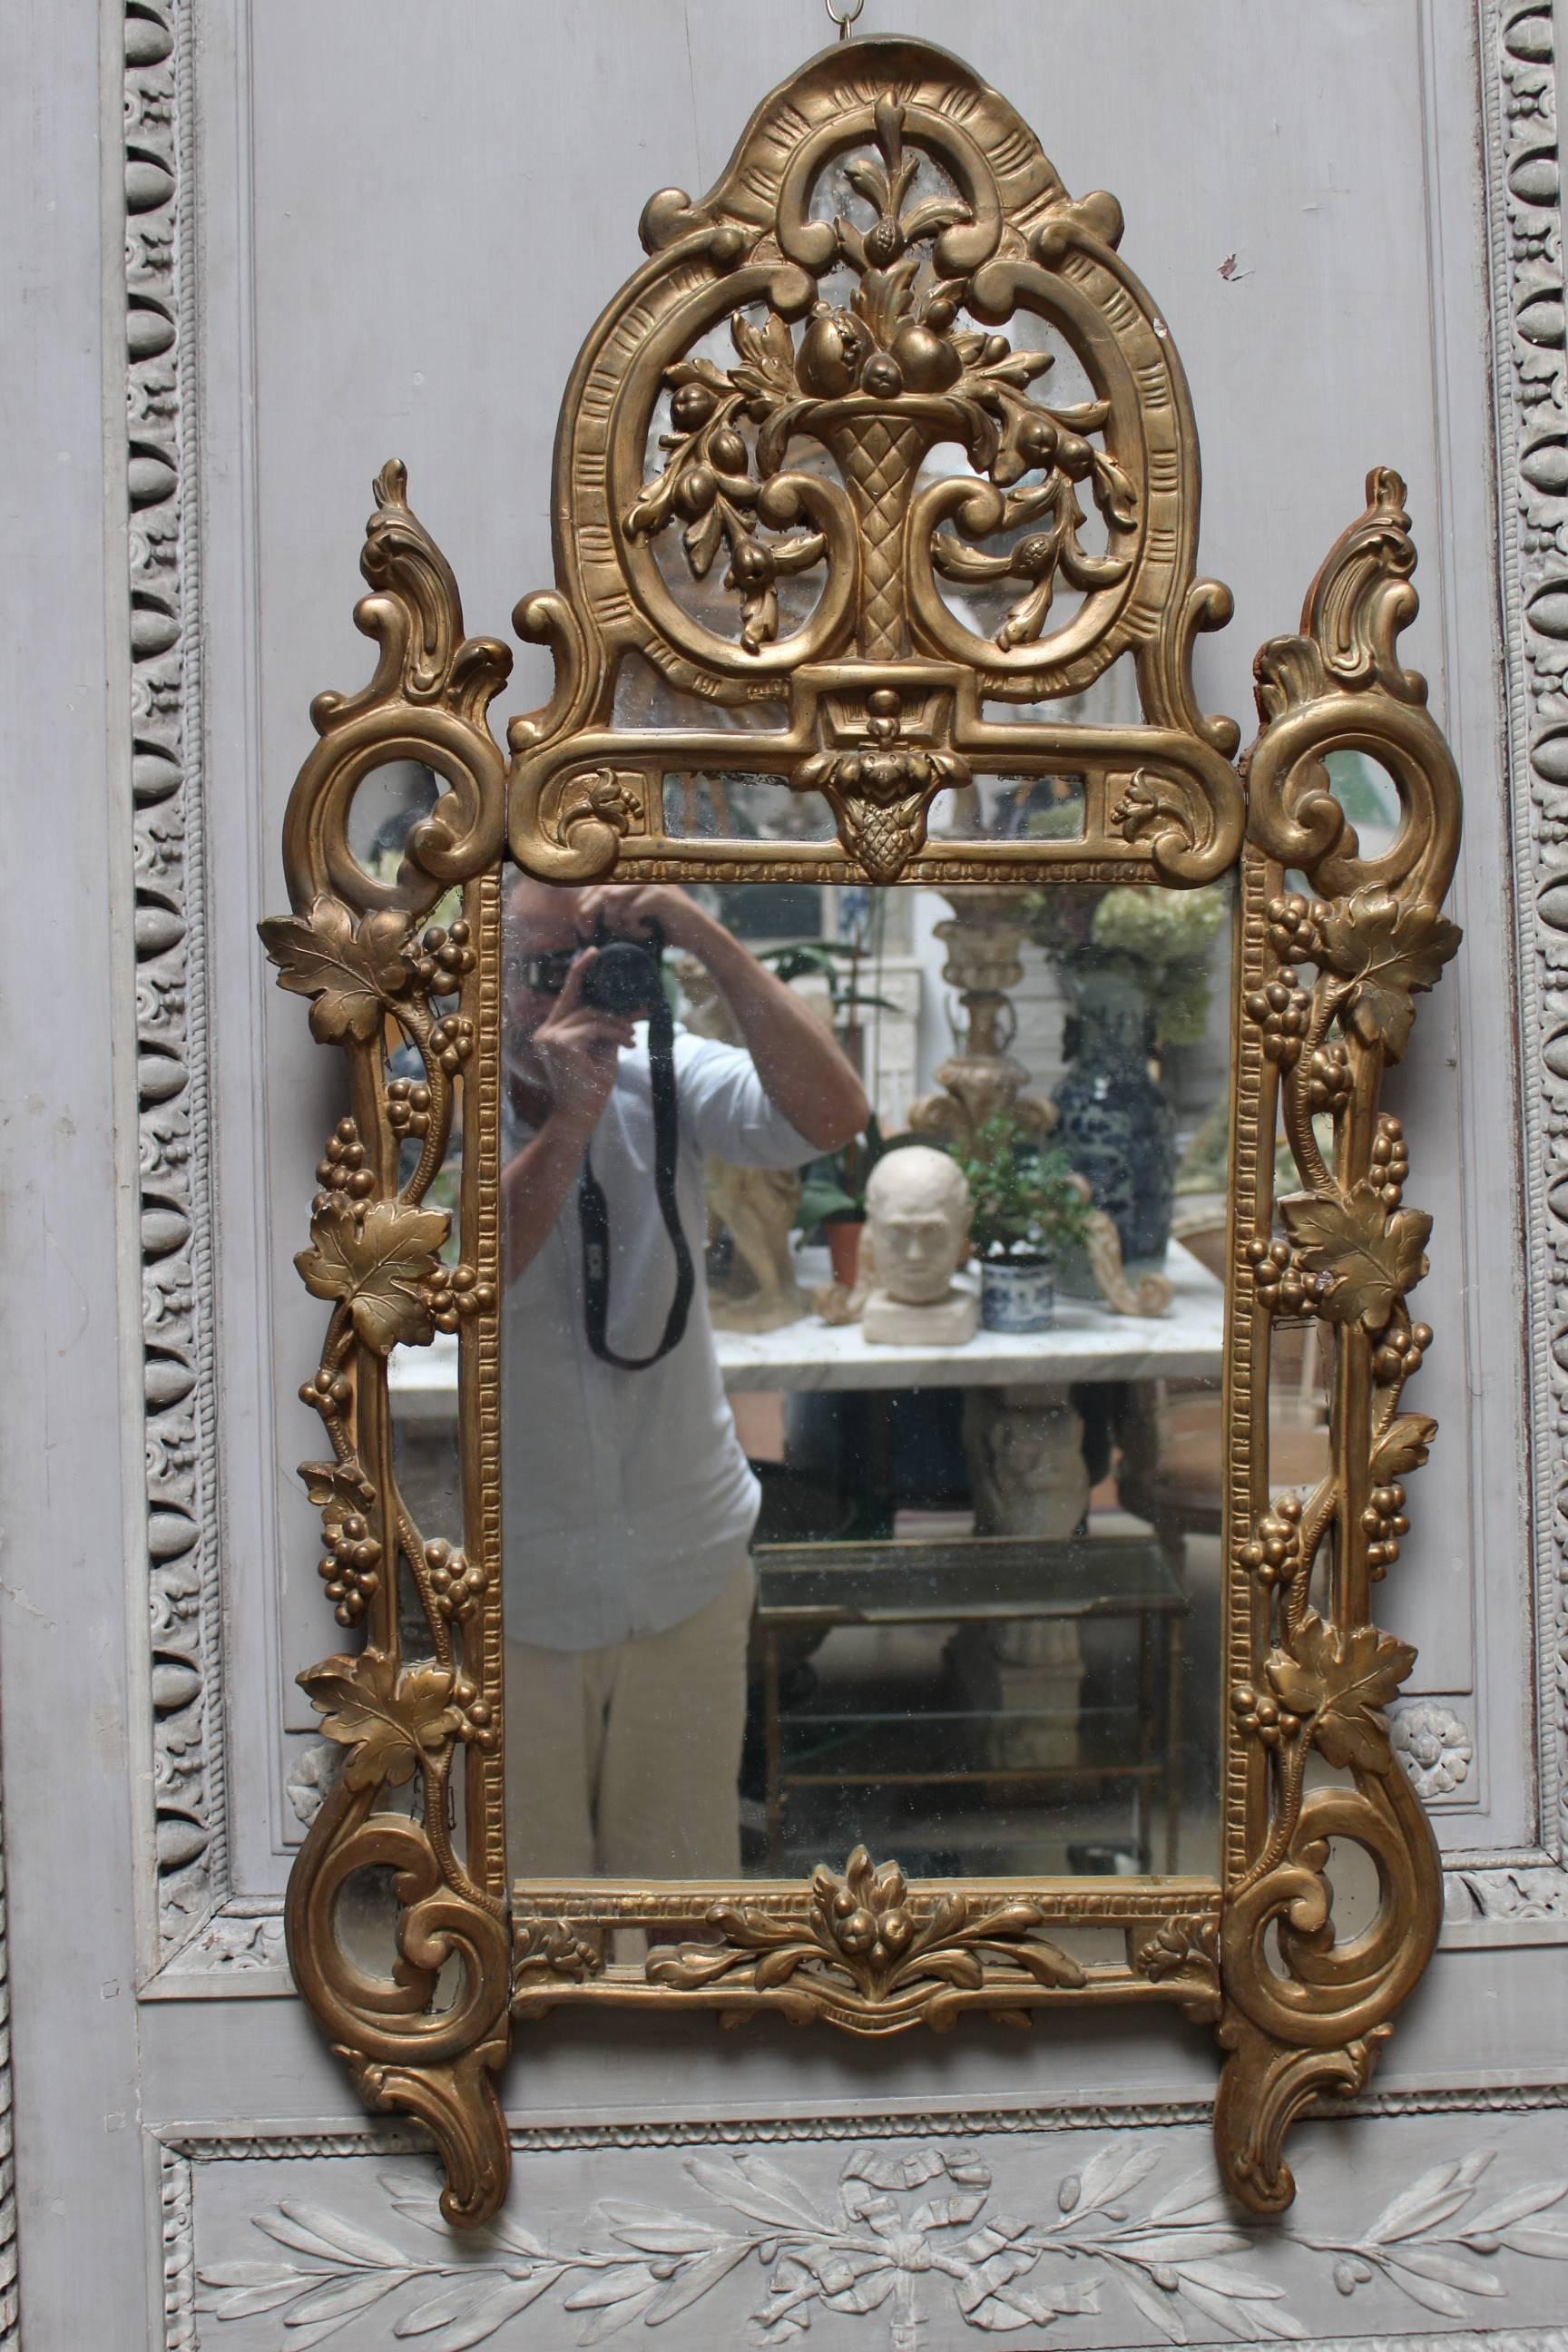 French Regence 18th century mirror with a gold leaf finish. This small mirror is decorated in grapes and vines as well as a conucopia with fruit and flowers. This small period mirror is the perfect scale for a powder room or small space.